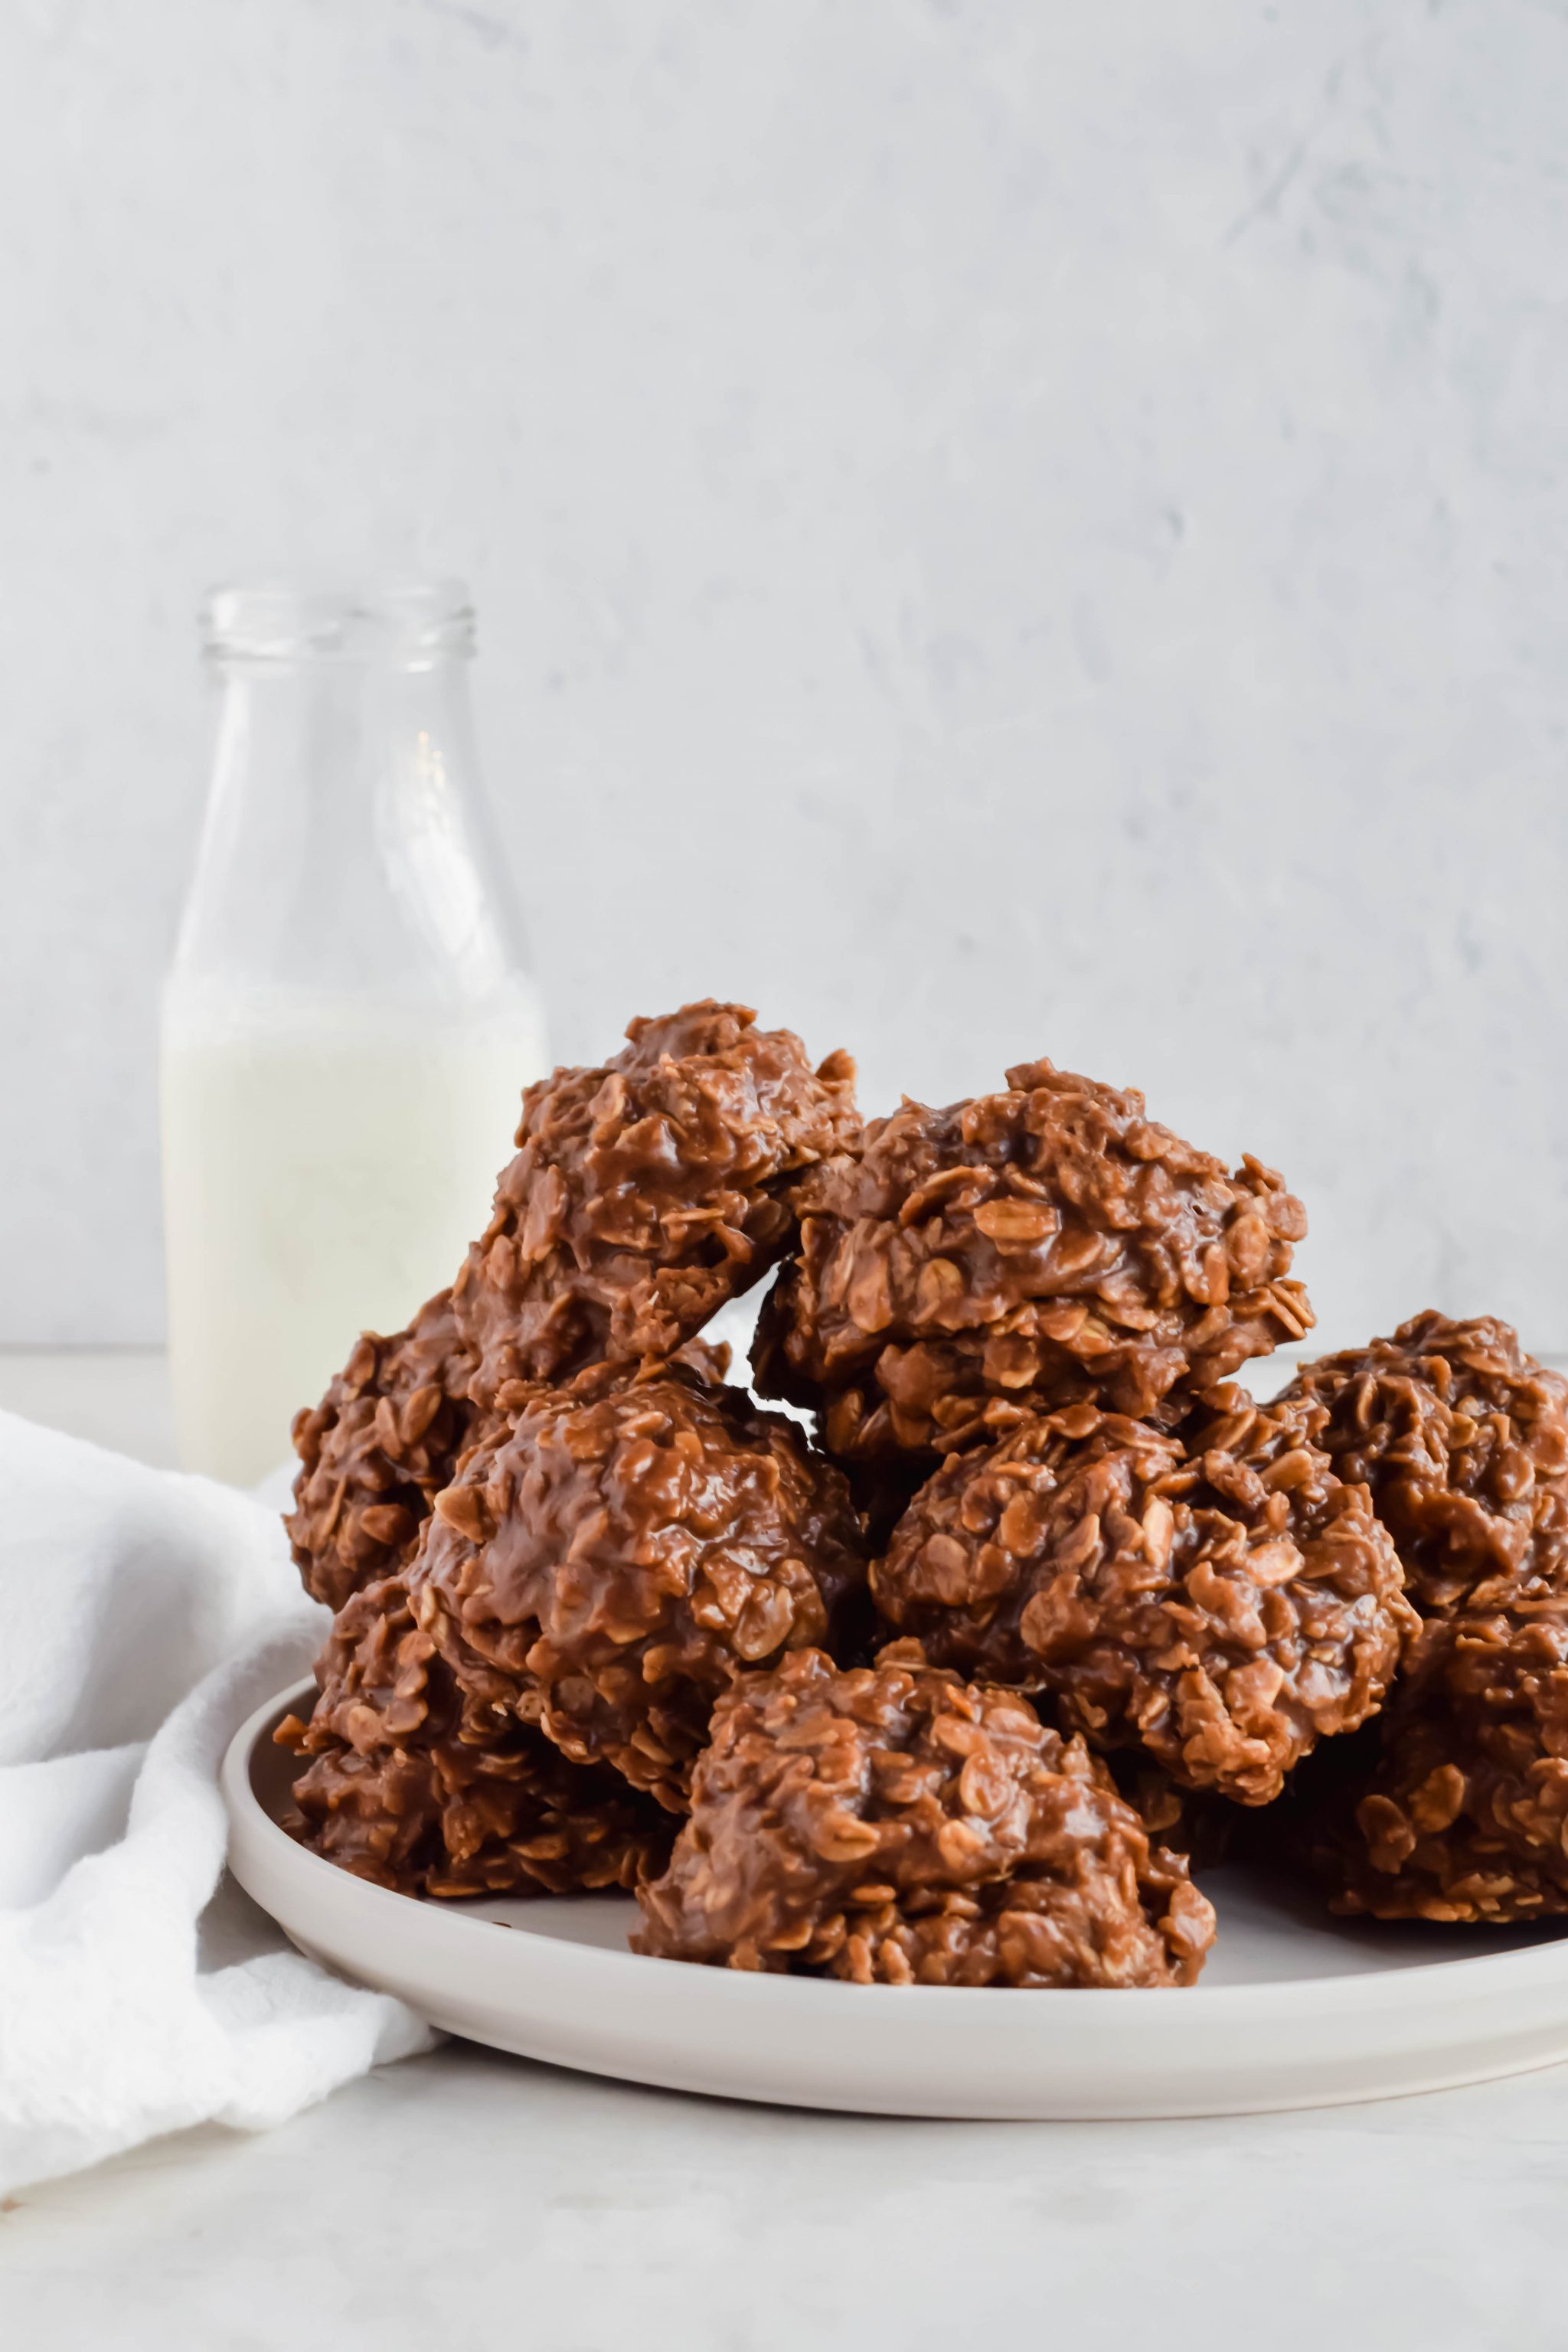 Pile of No Bake Chocolate Oatmeal Cookies without Peanut Butter on a plate with a jug of milk in the background